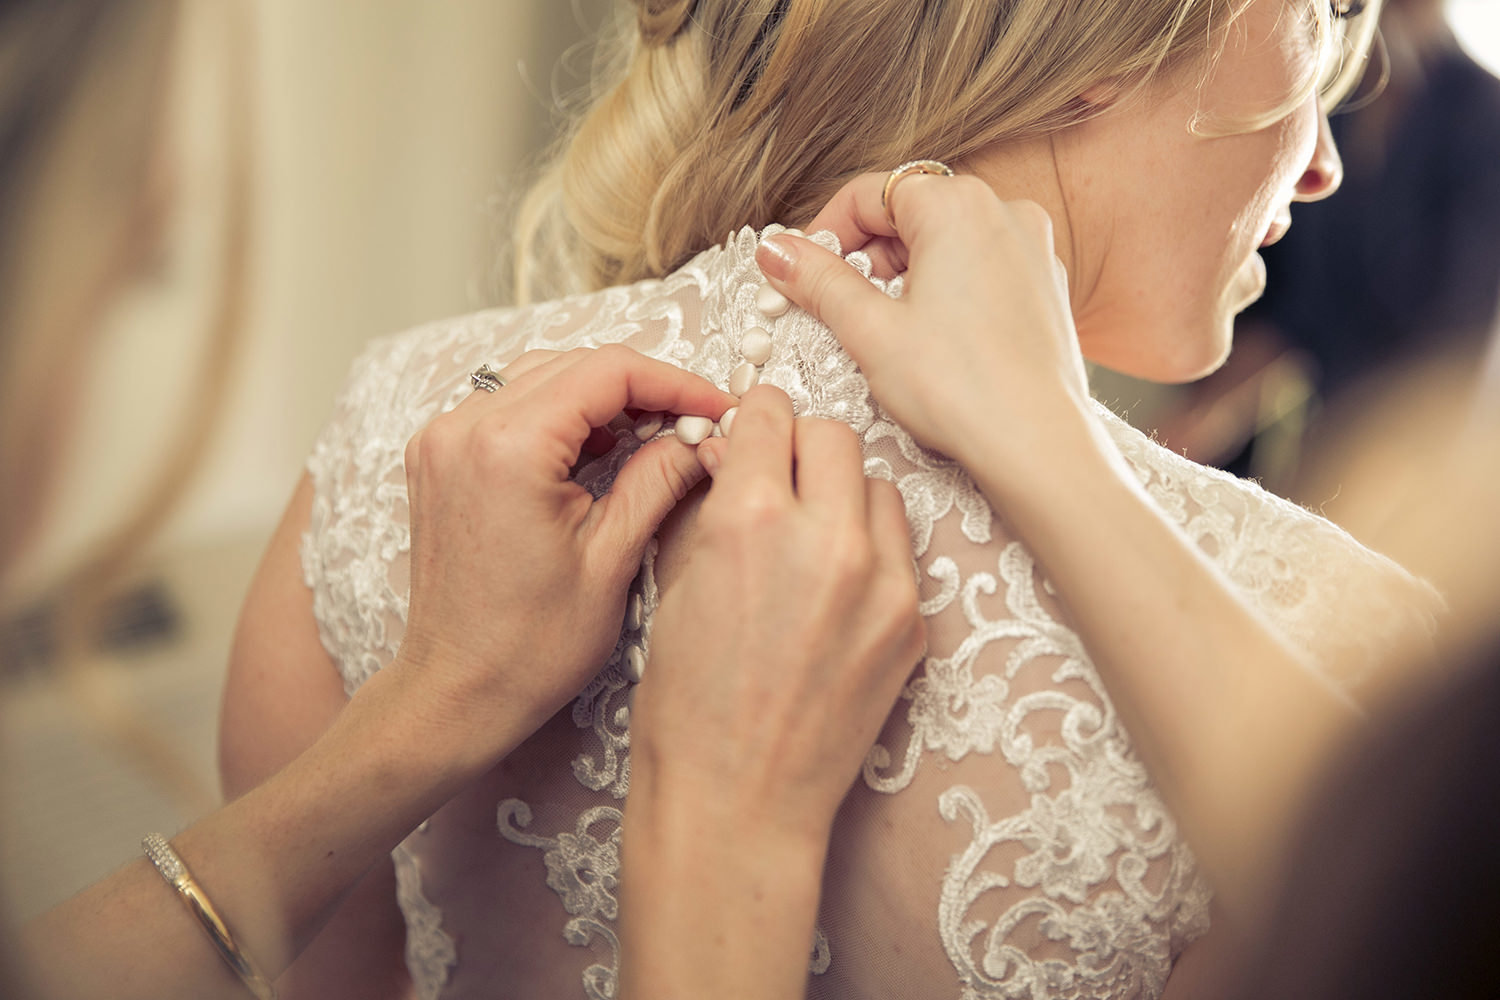 The final touches as the bride gets ready